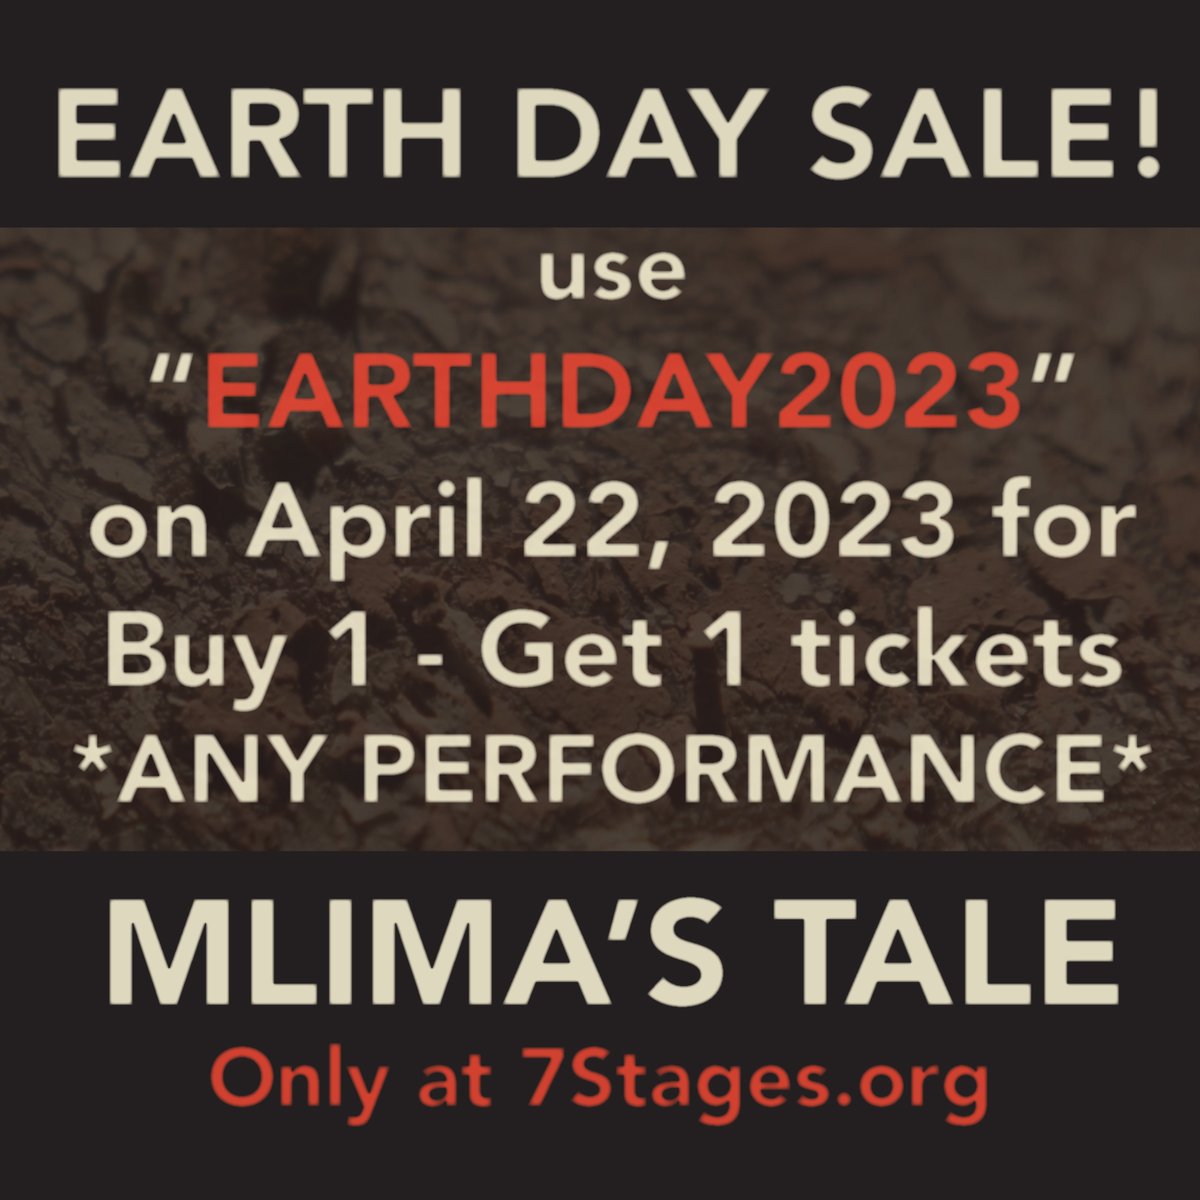 Earth Day S@le - BOGO for Mlima's Tale! Use 'EARTHDAY2023' on our site to get 2-for-1 tix #earthday2023 #7StagesATL #l5patl #l5p #livetheatre #AtlantaTheatre #AtlantaEvents #mlimastale #atlantatheatre #Atlanta #7stagesatl #atlantatheater #L5PATL #LittleFivePoints